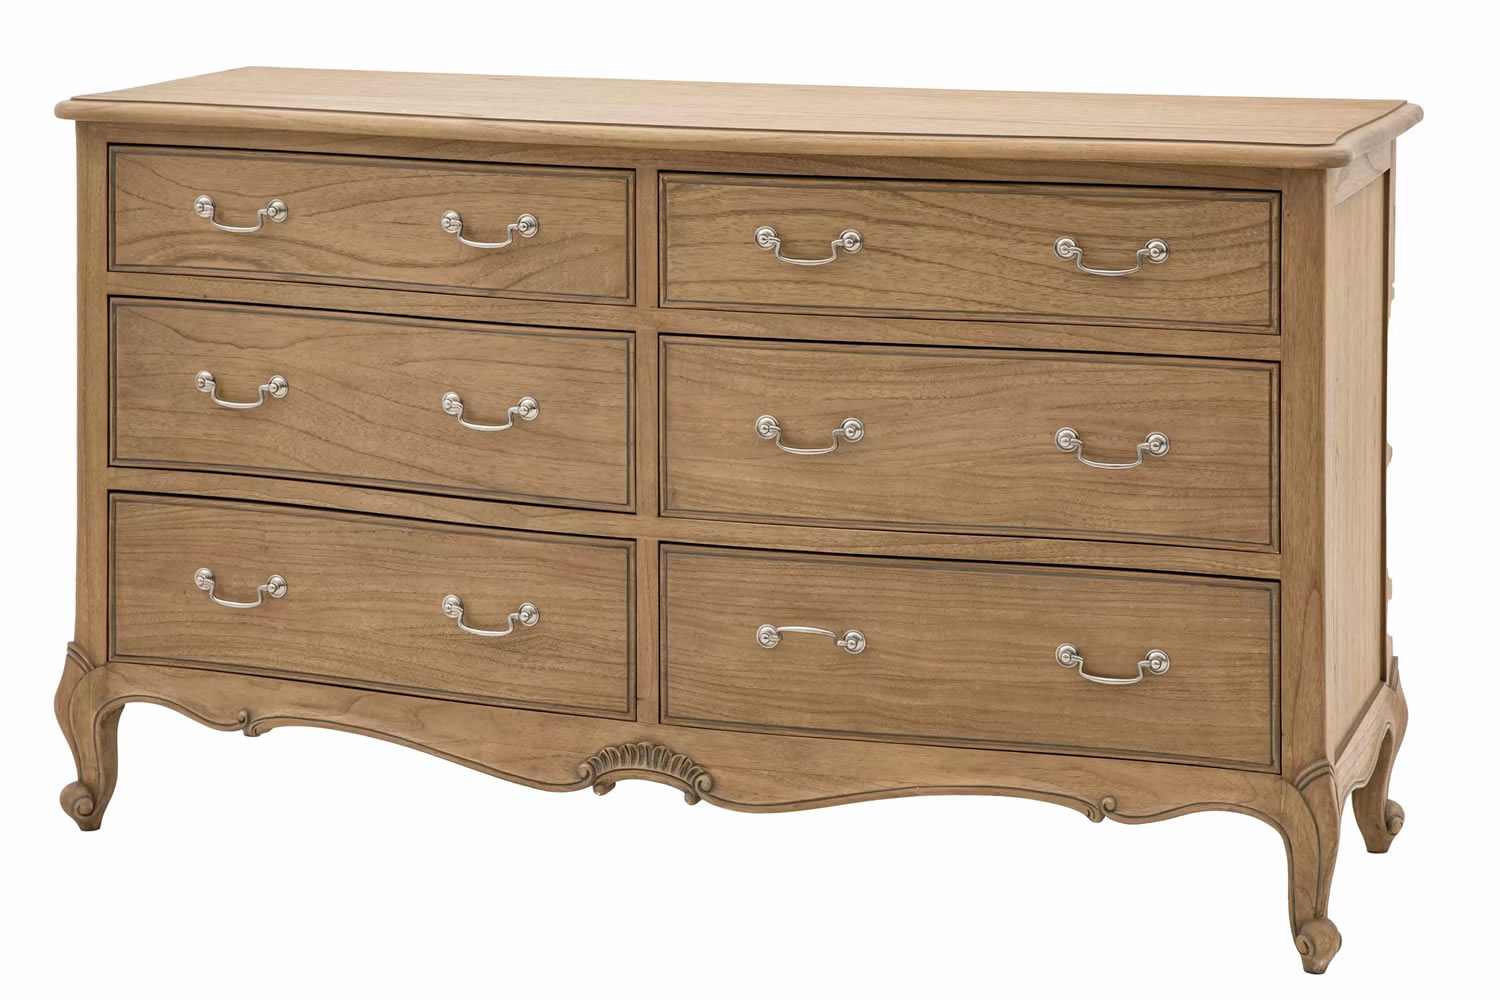 View Chic 6 Drawer Chest Weathered Wide Bedroom Storage Unit With Sliding Drawers Crafted From Solid Mindy Ash Traditional French Furniture Design information